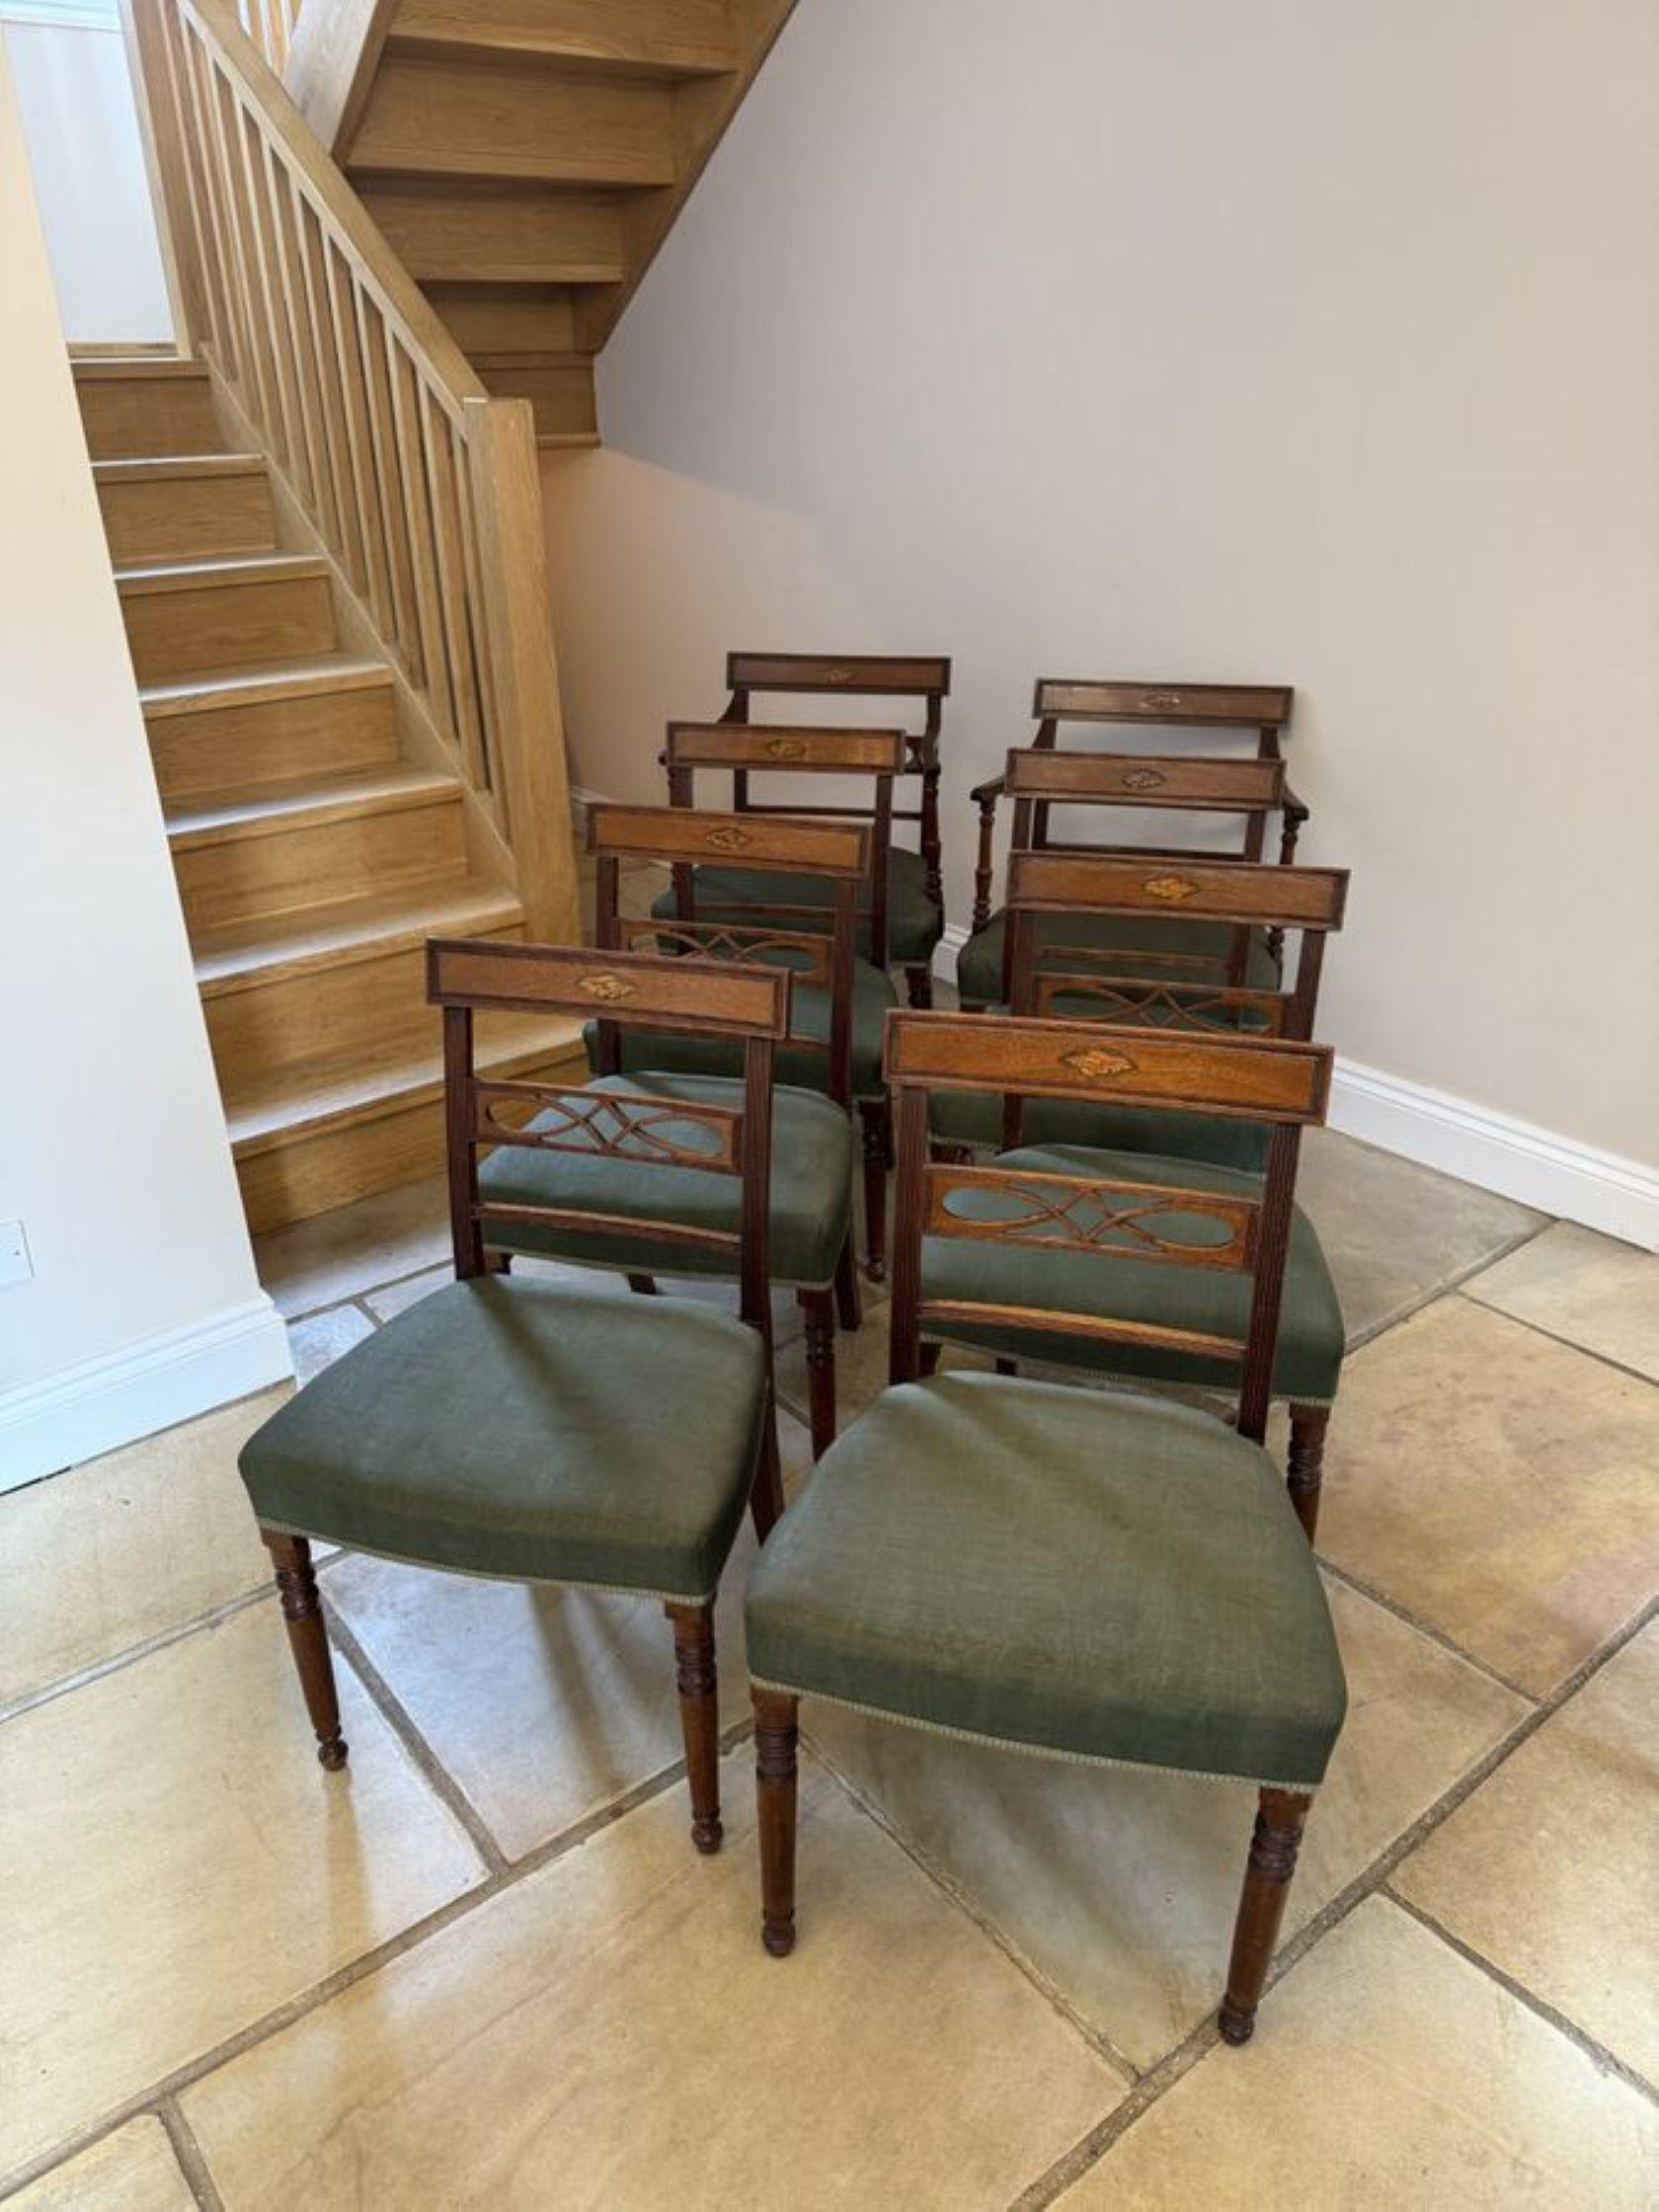 Stunning set of eight antique George III mahogany inlaid dining chairs, consisting of a pair of carver chairs and six single chairs with a quality mahogany reeded top rail with a shell inlaid carved mahogany centre splat, stuff over seats standing